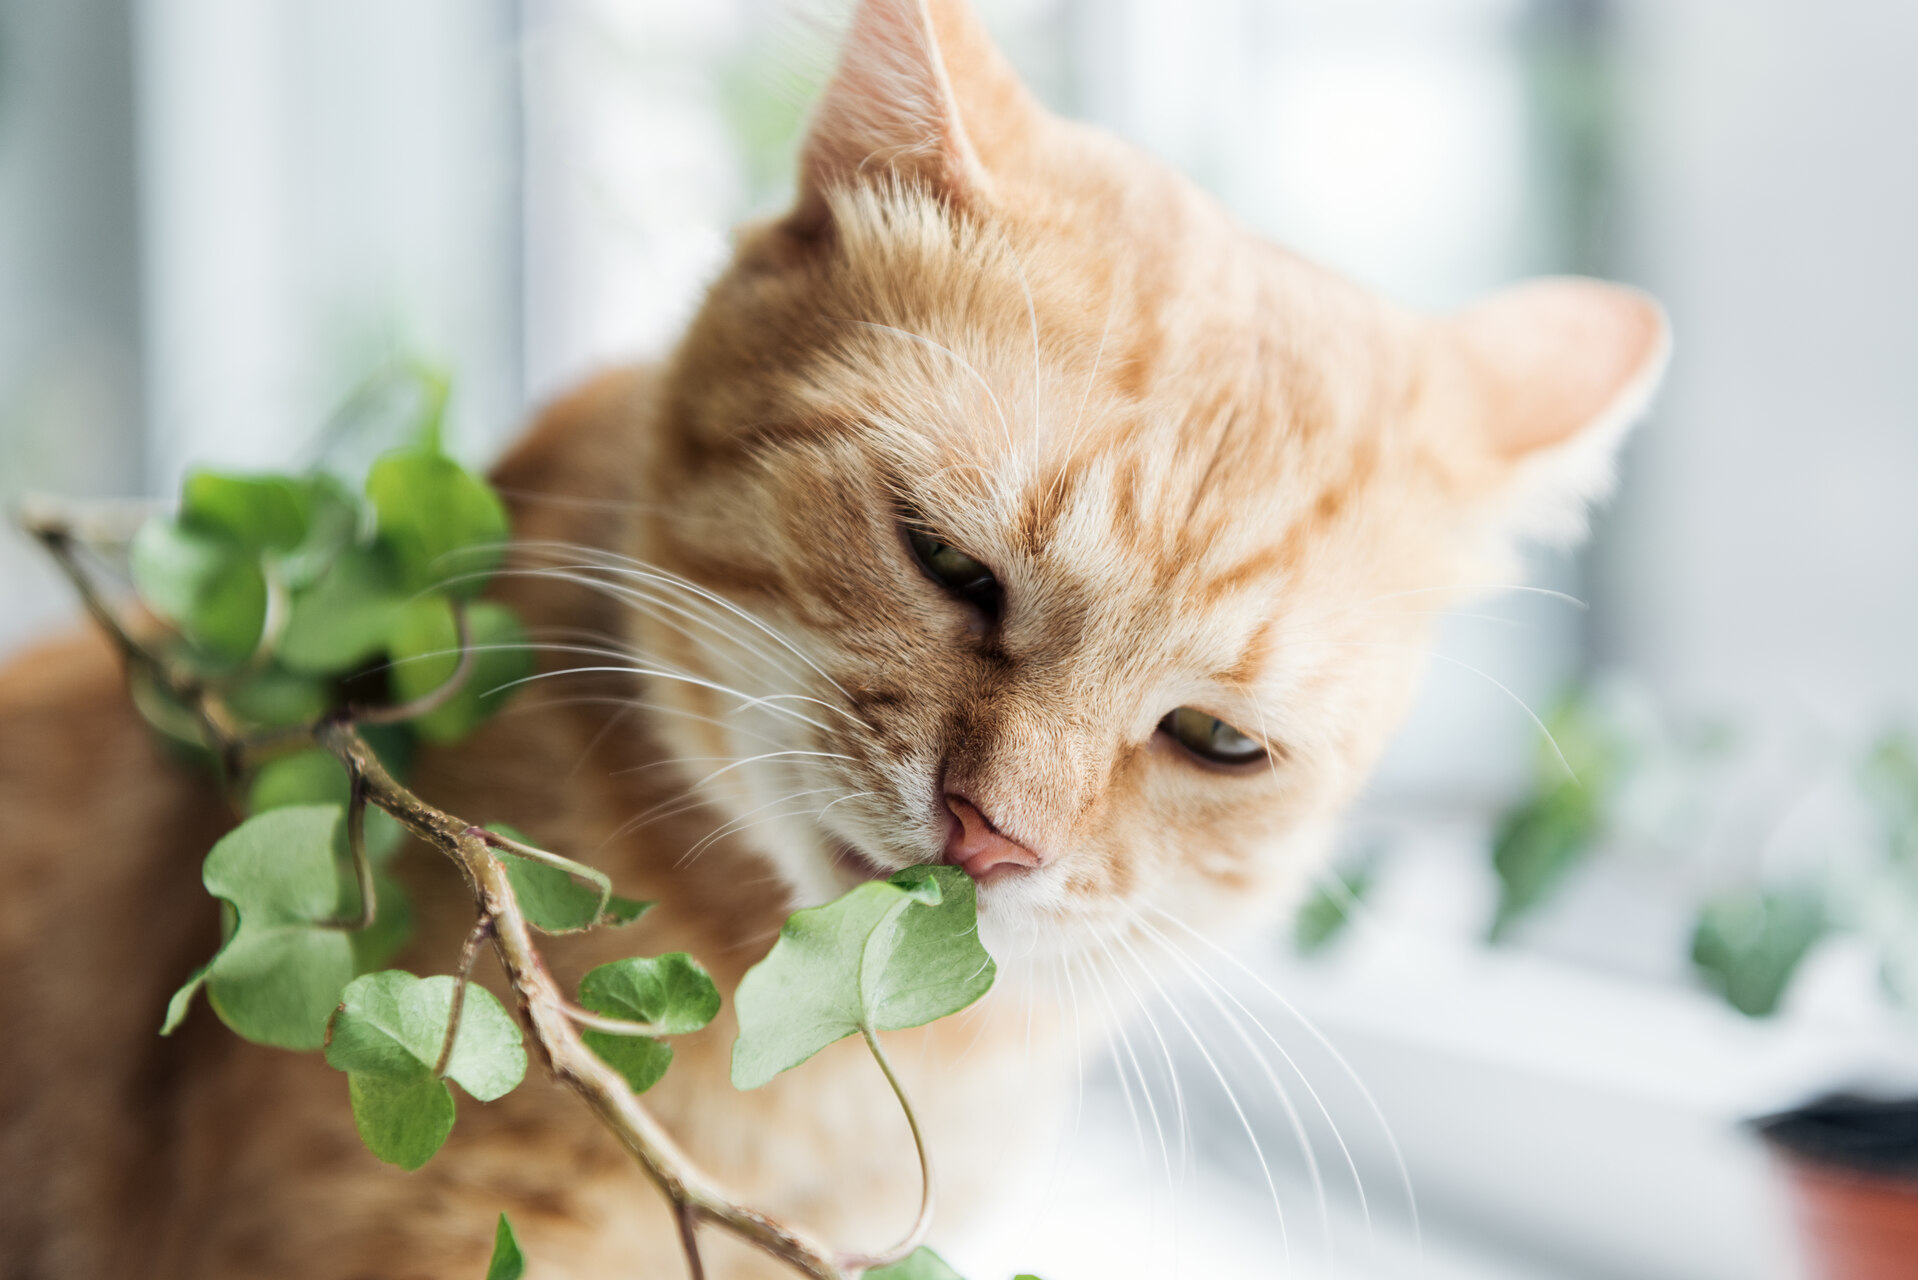 A cat sniffing an indoor plant